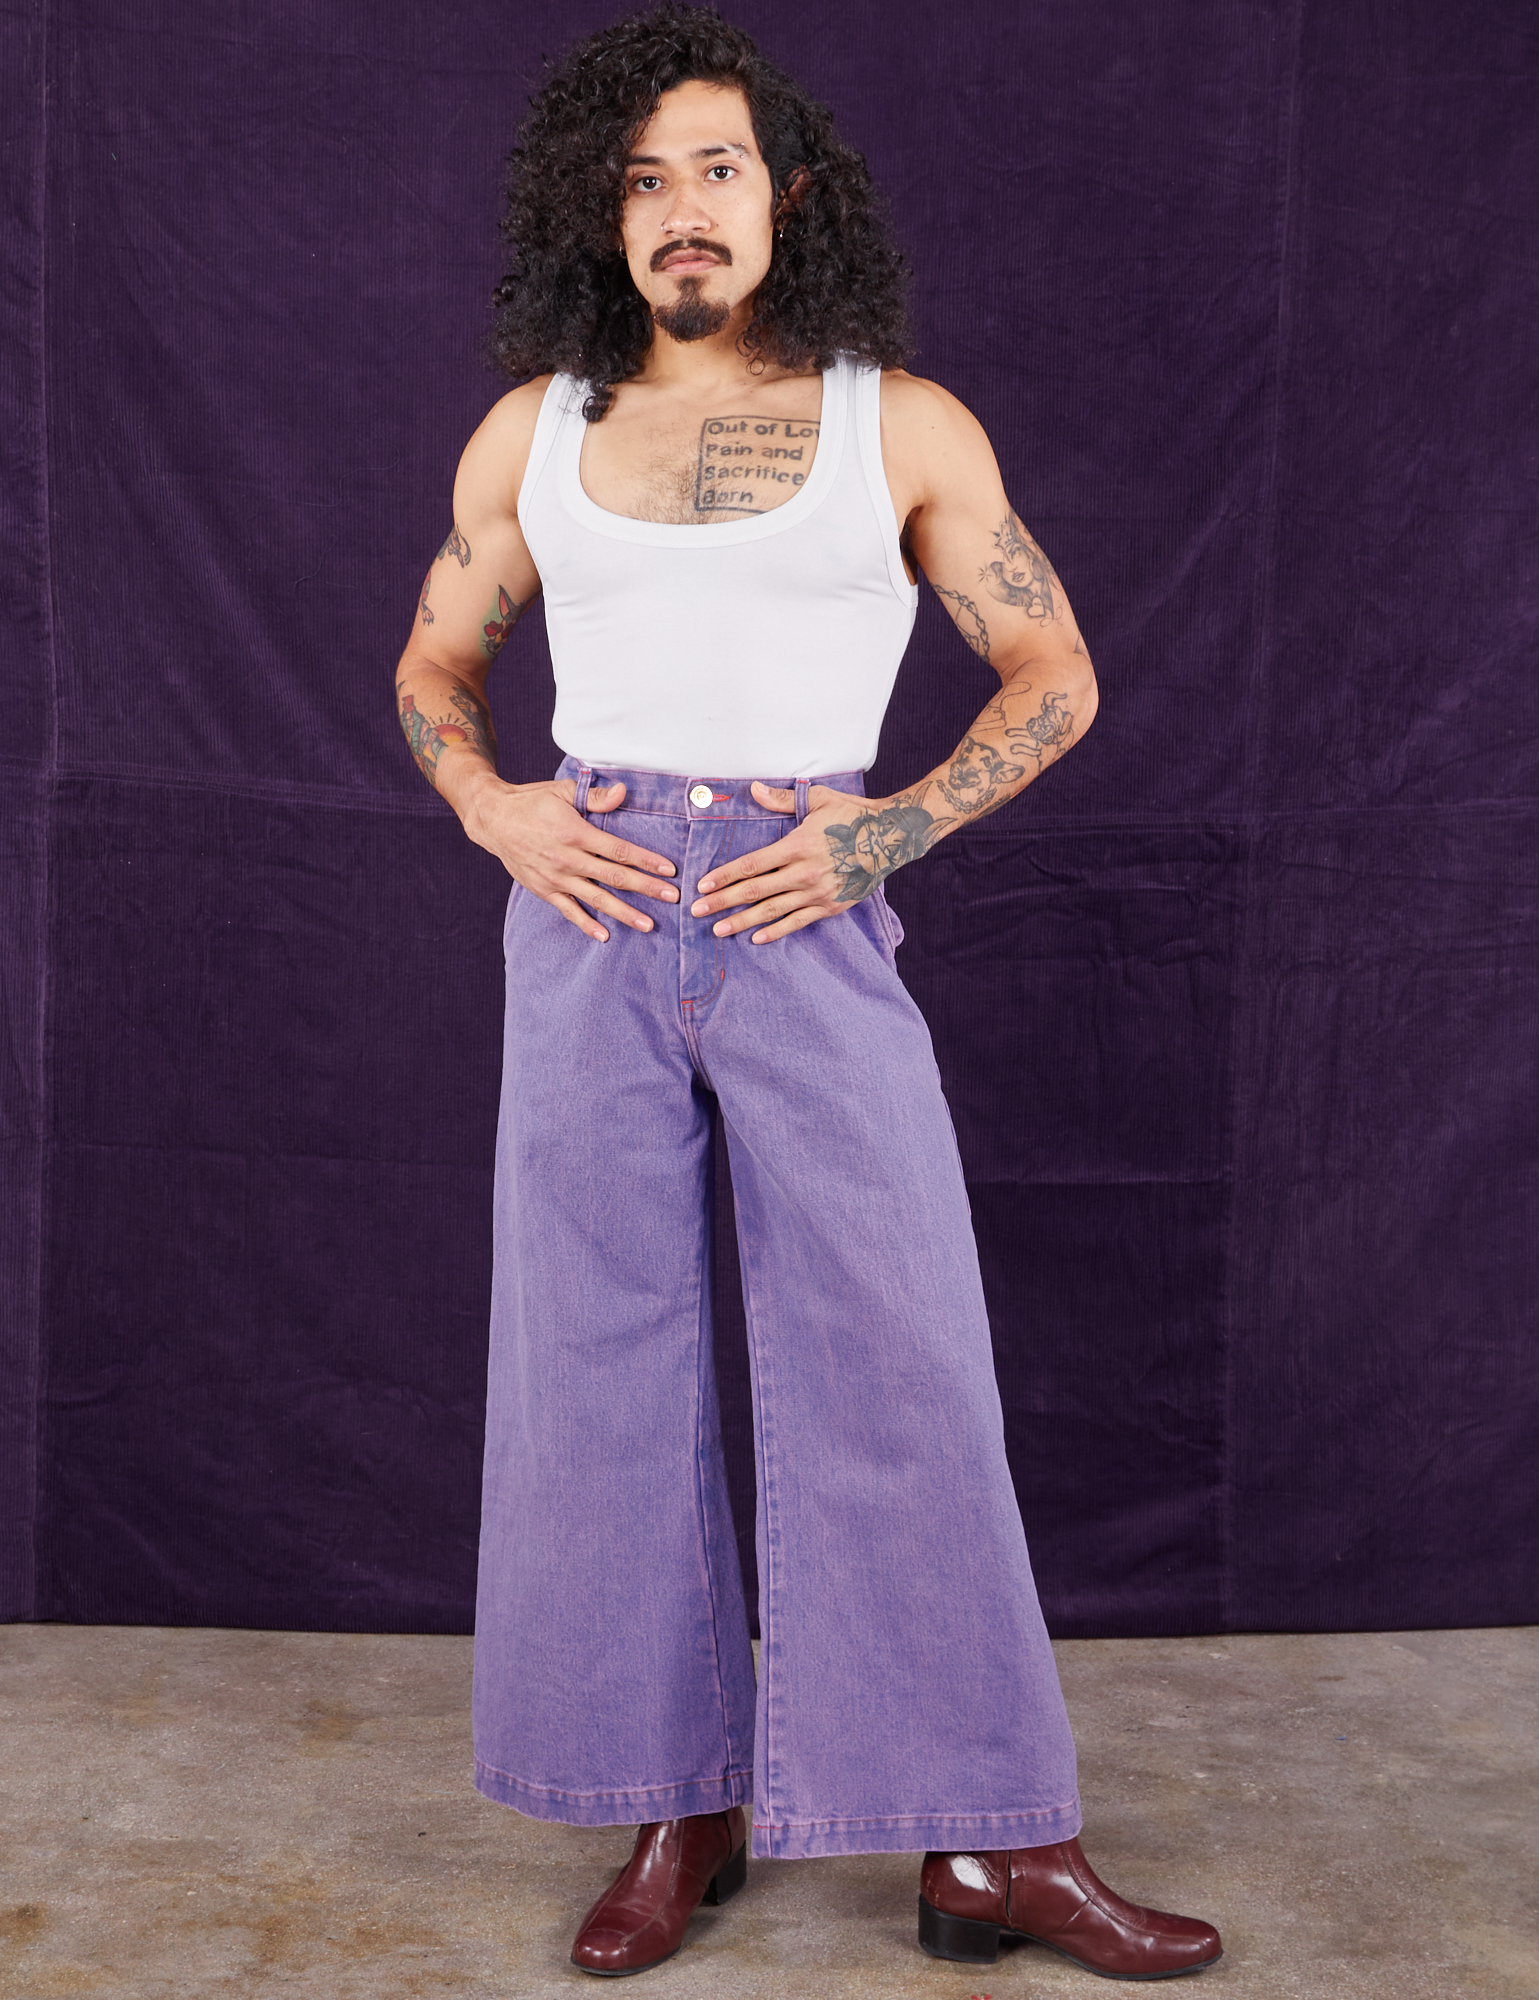 Jesse is wearing Overdyed Wide Leg Trousers in Faded Grape and Cropped Tank Top in vintage tee off-white